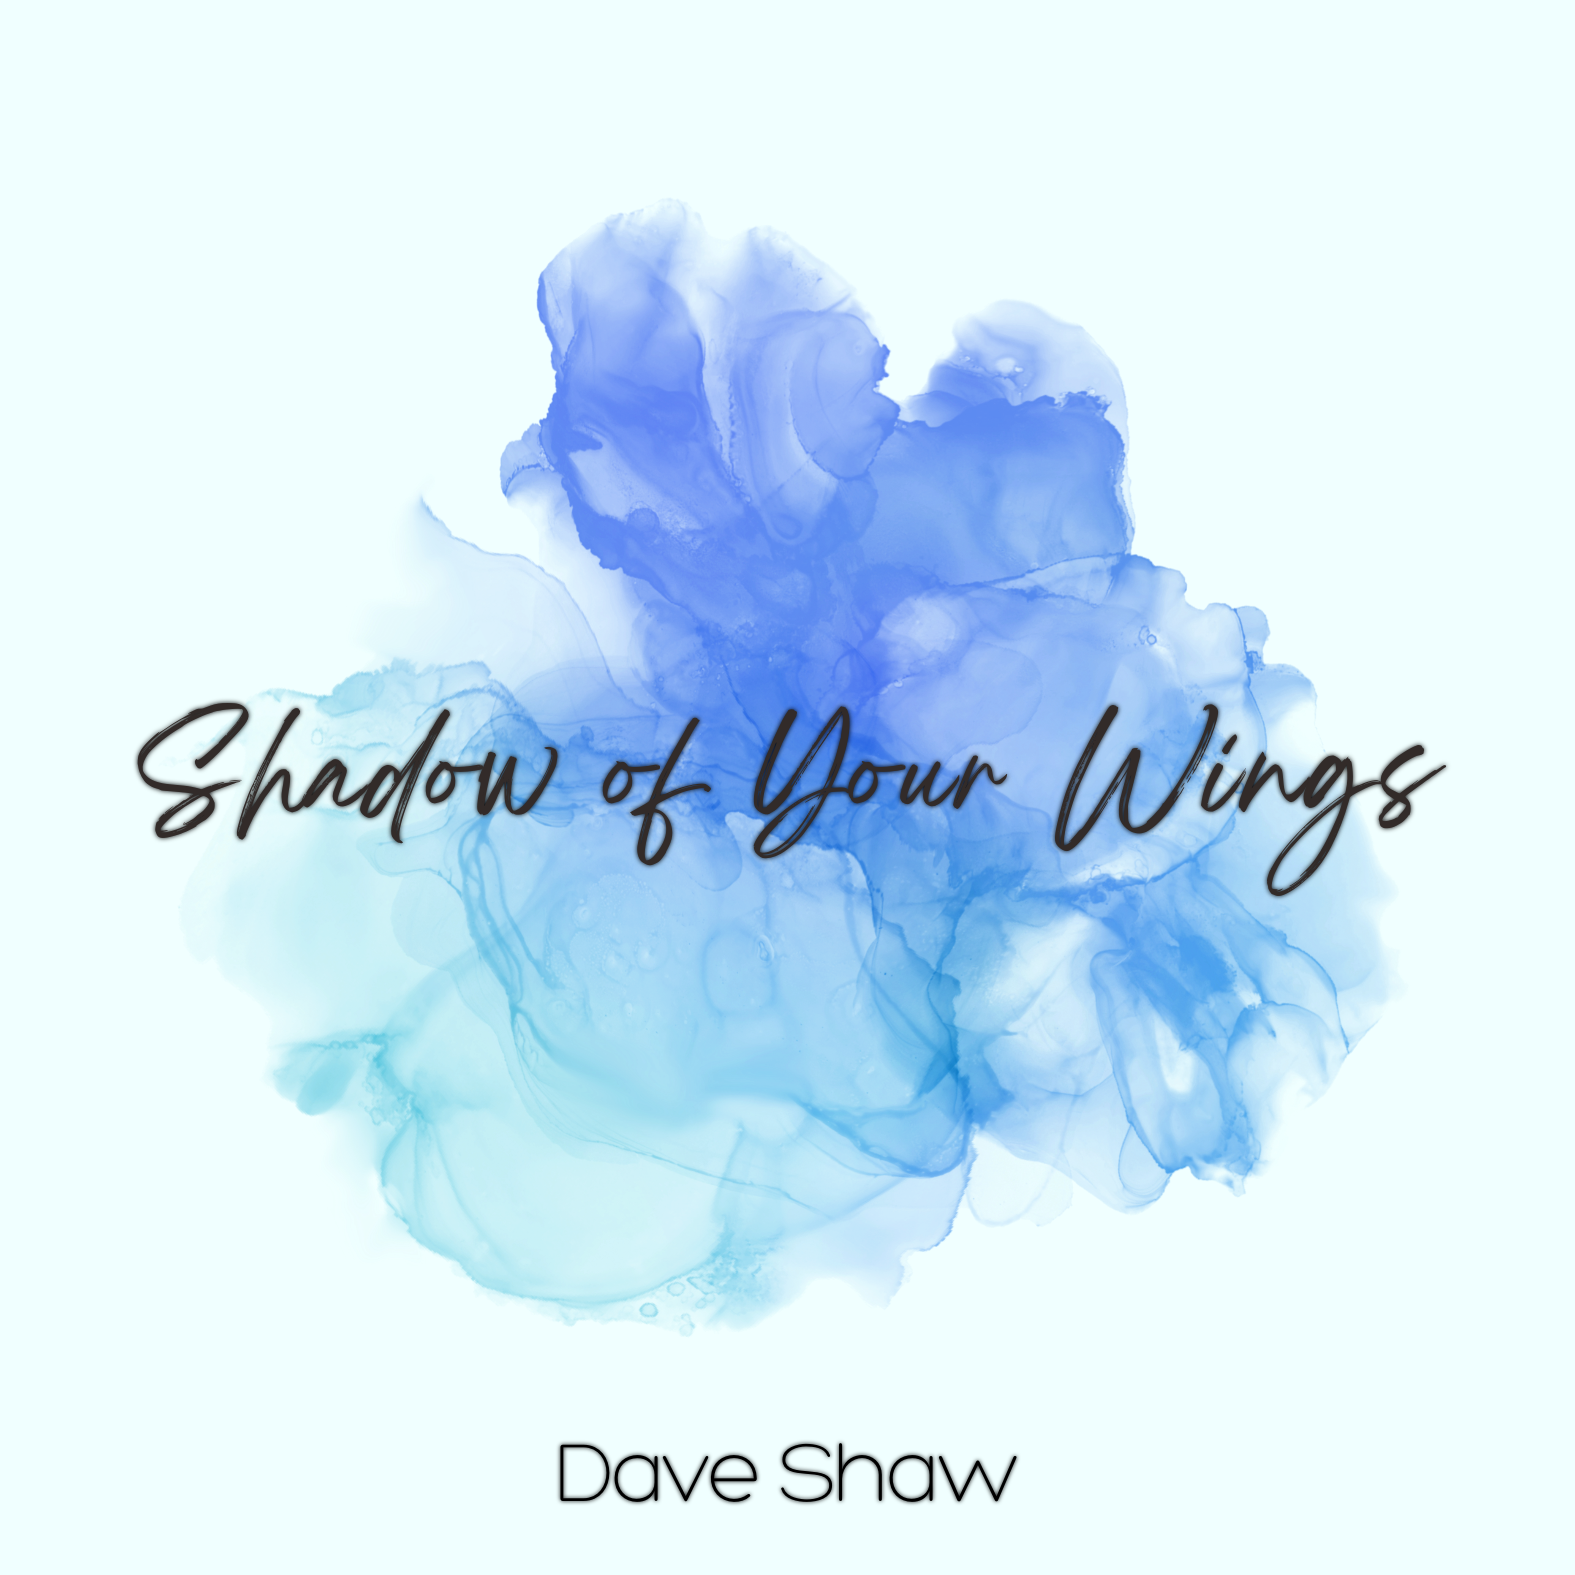 CD Artwork for Dave Shaw's CD Shadow of your wings